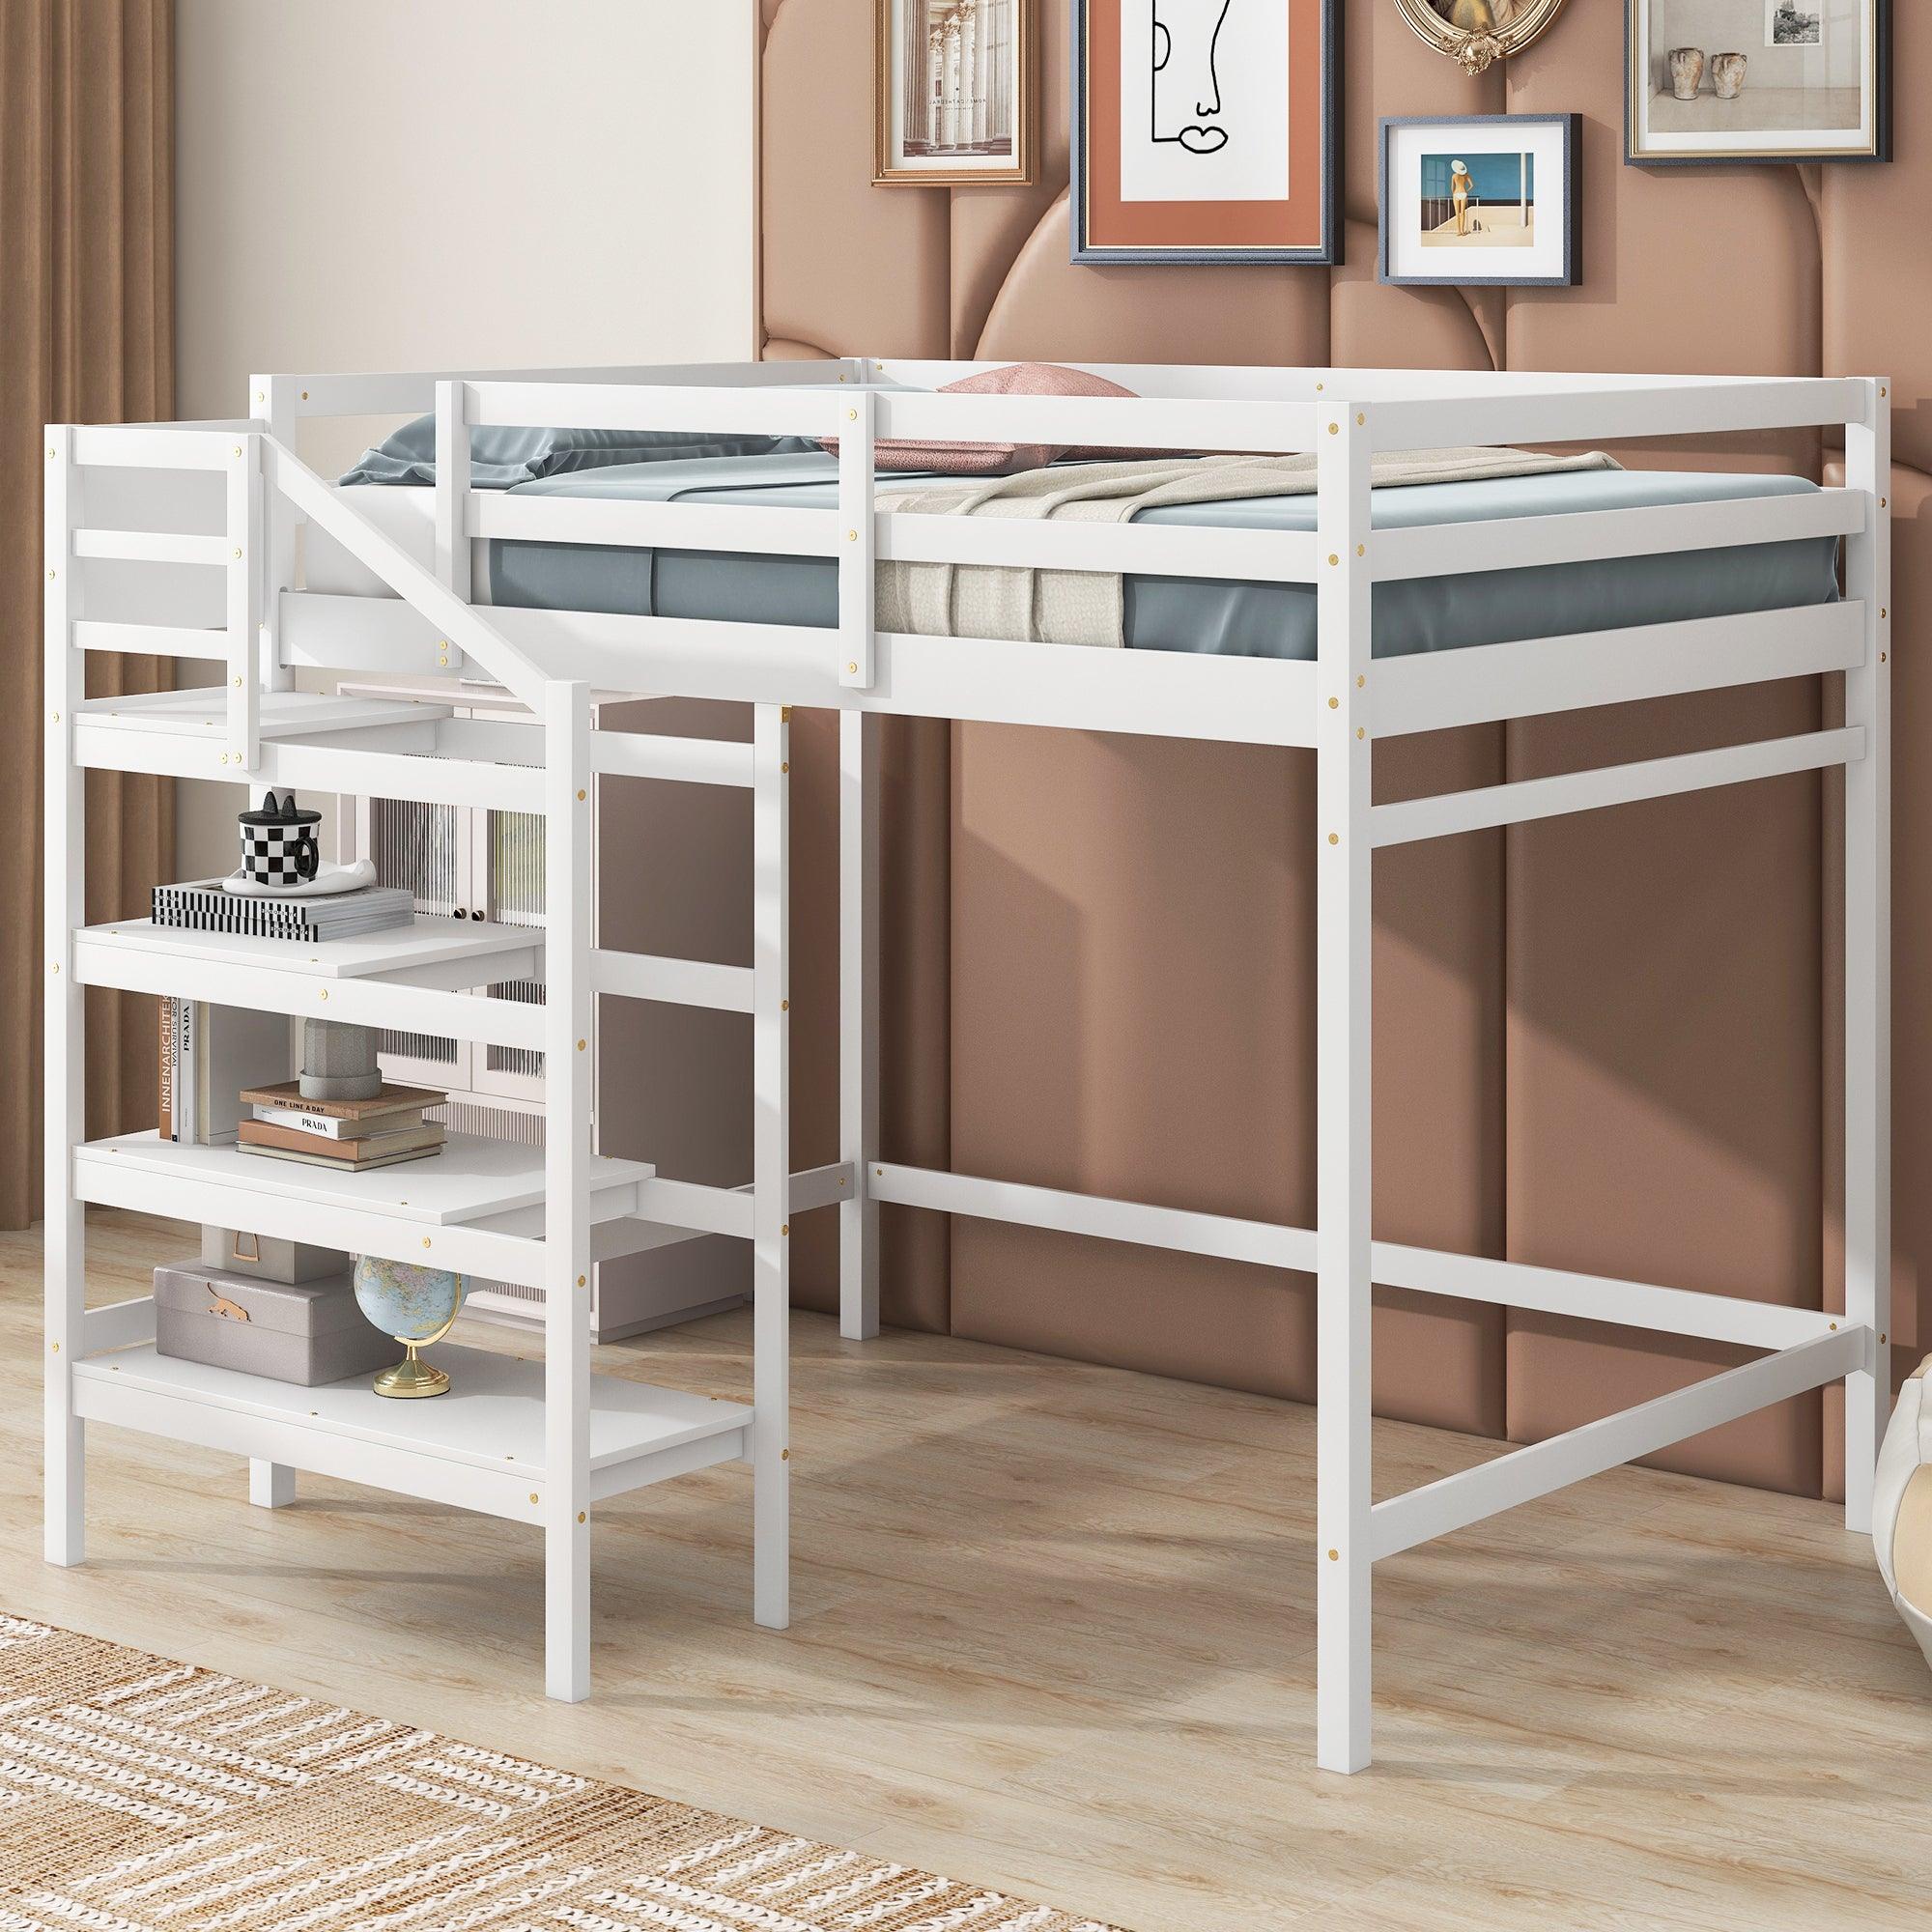 🆓🚛 Full Size Loft Bed With Built-in Storage Staircase & Hanger for Clothes, White